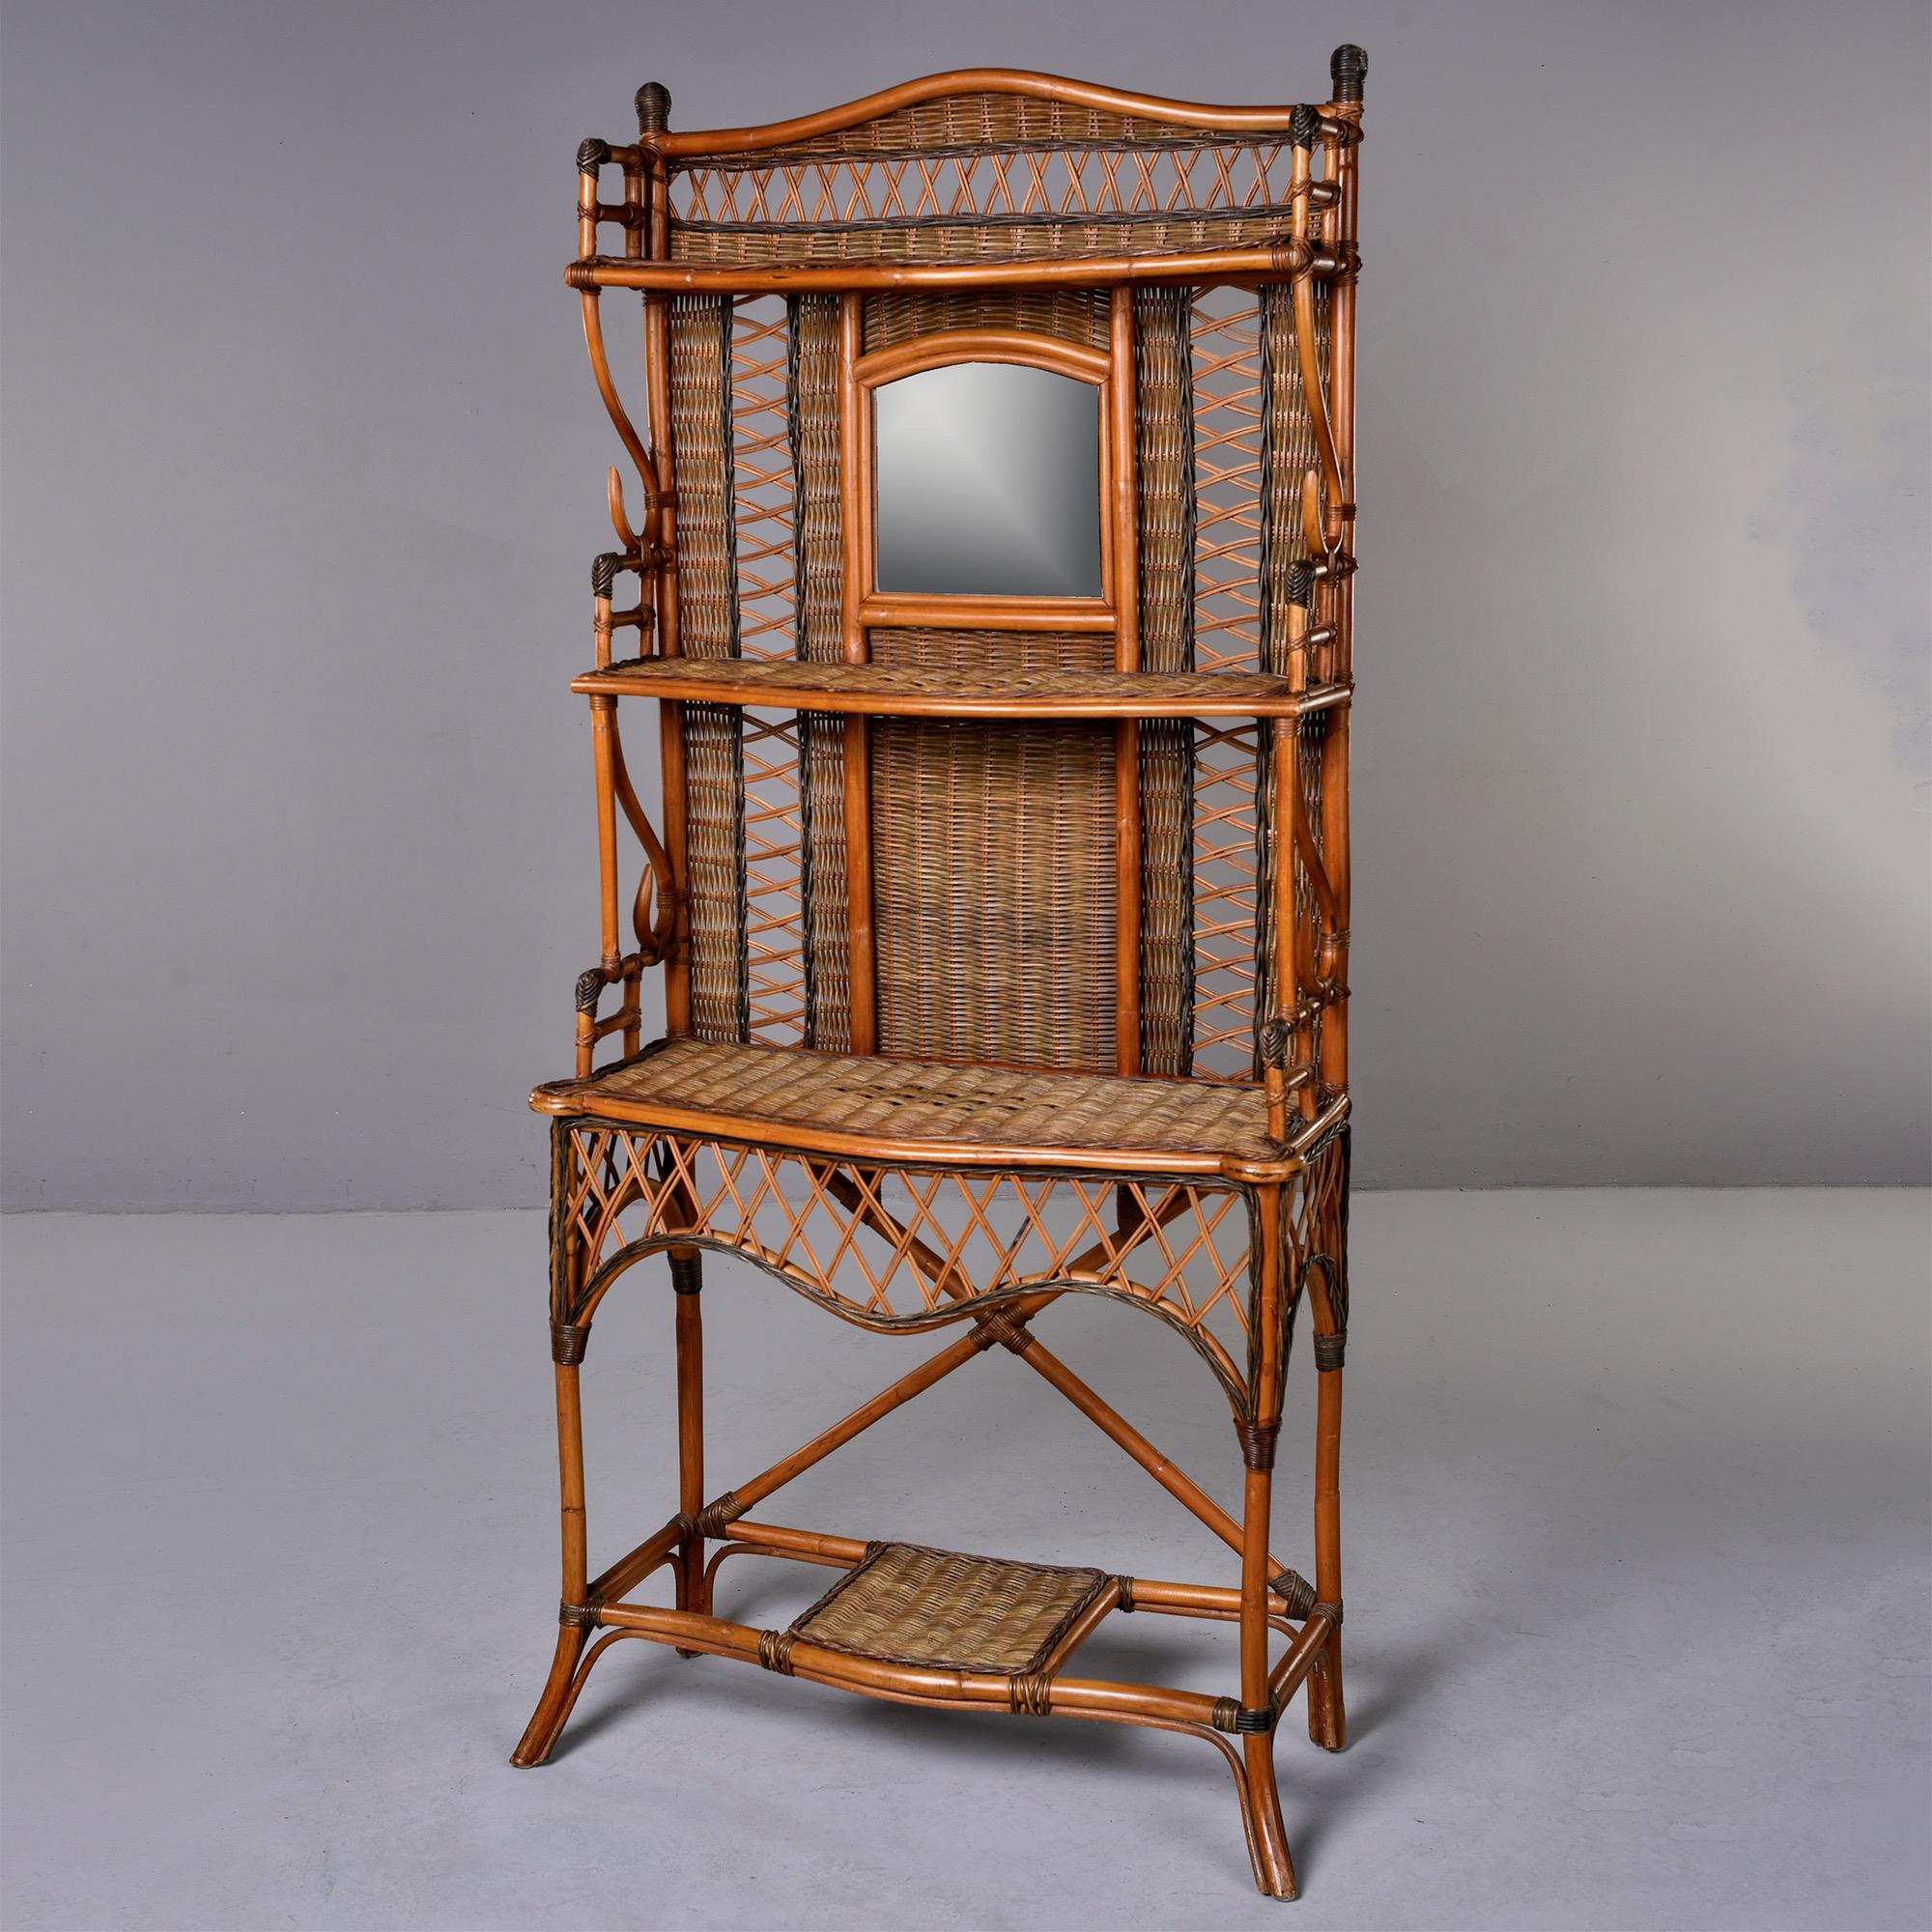 Found in England, this circa 1940s wicker and rattan hall stand has three main shelves on the top portion, a lower shelf that could be used for a potted plant and a mirror. Unknown maker. Very good vintage condition. 

Mirror Size: 9.75” H x 10.5”